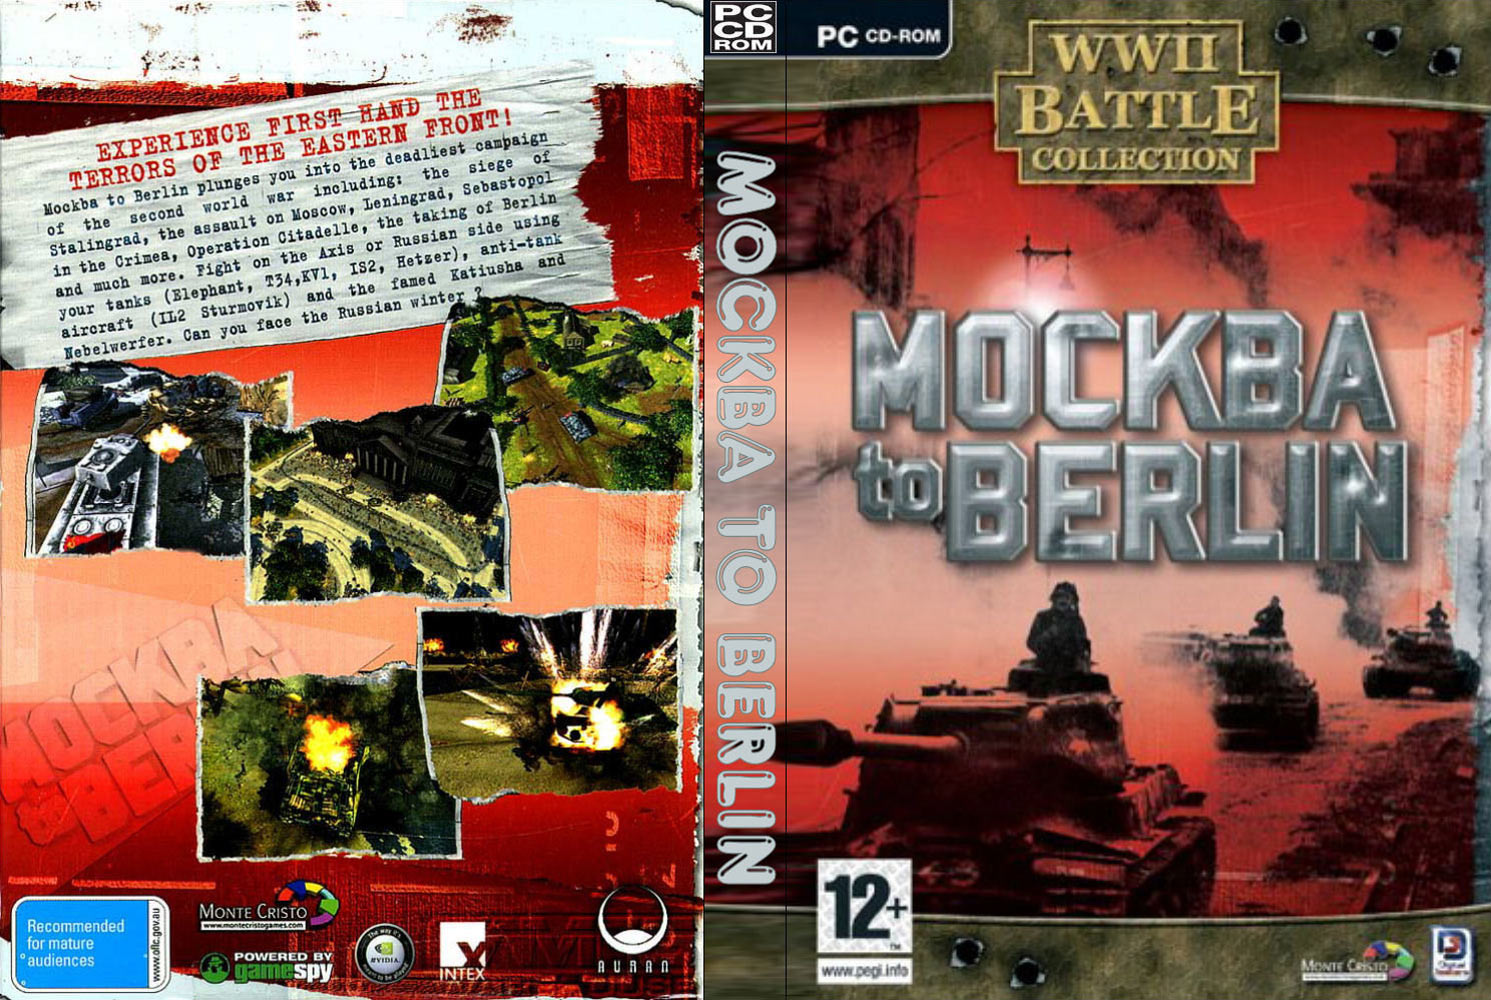 Moscow to Berlin - DVD obal